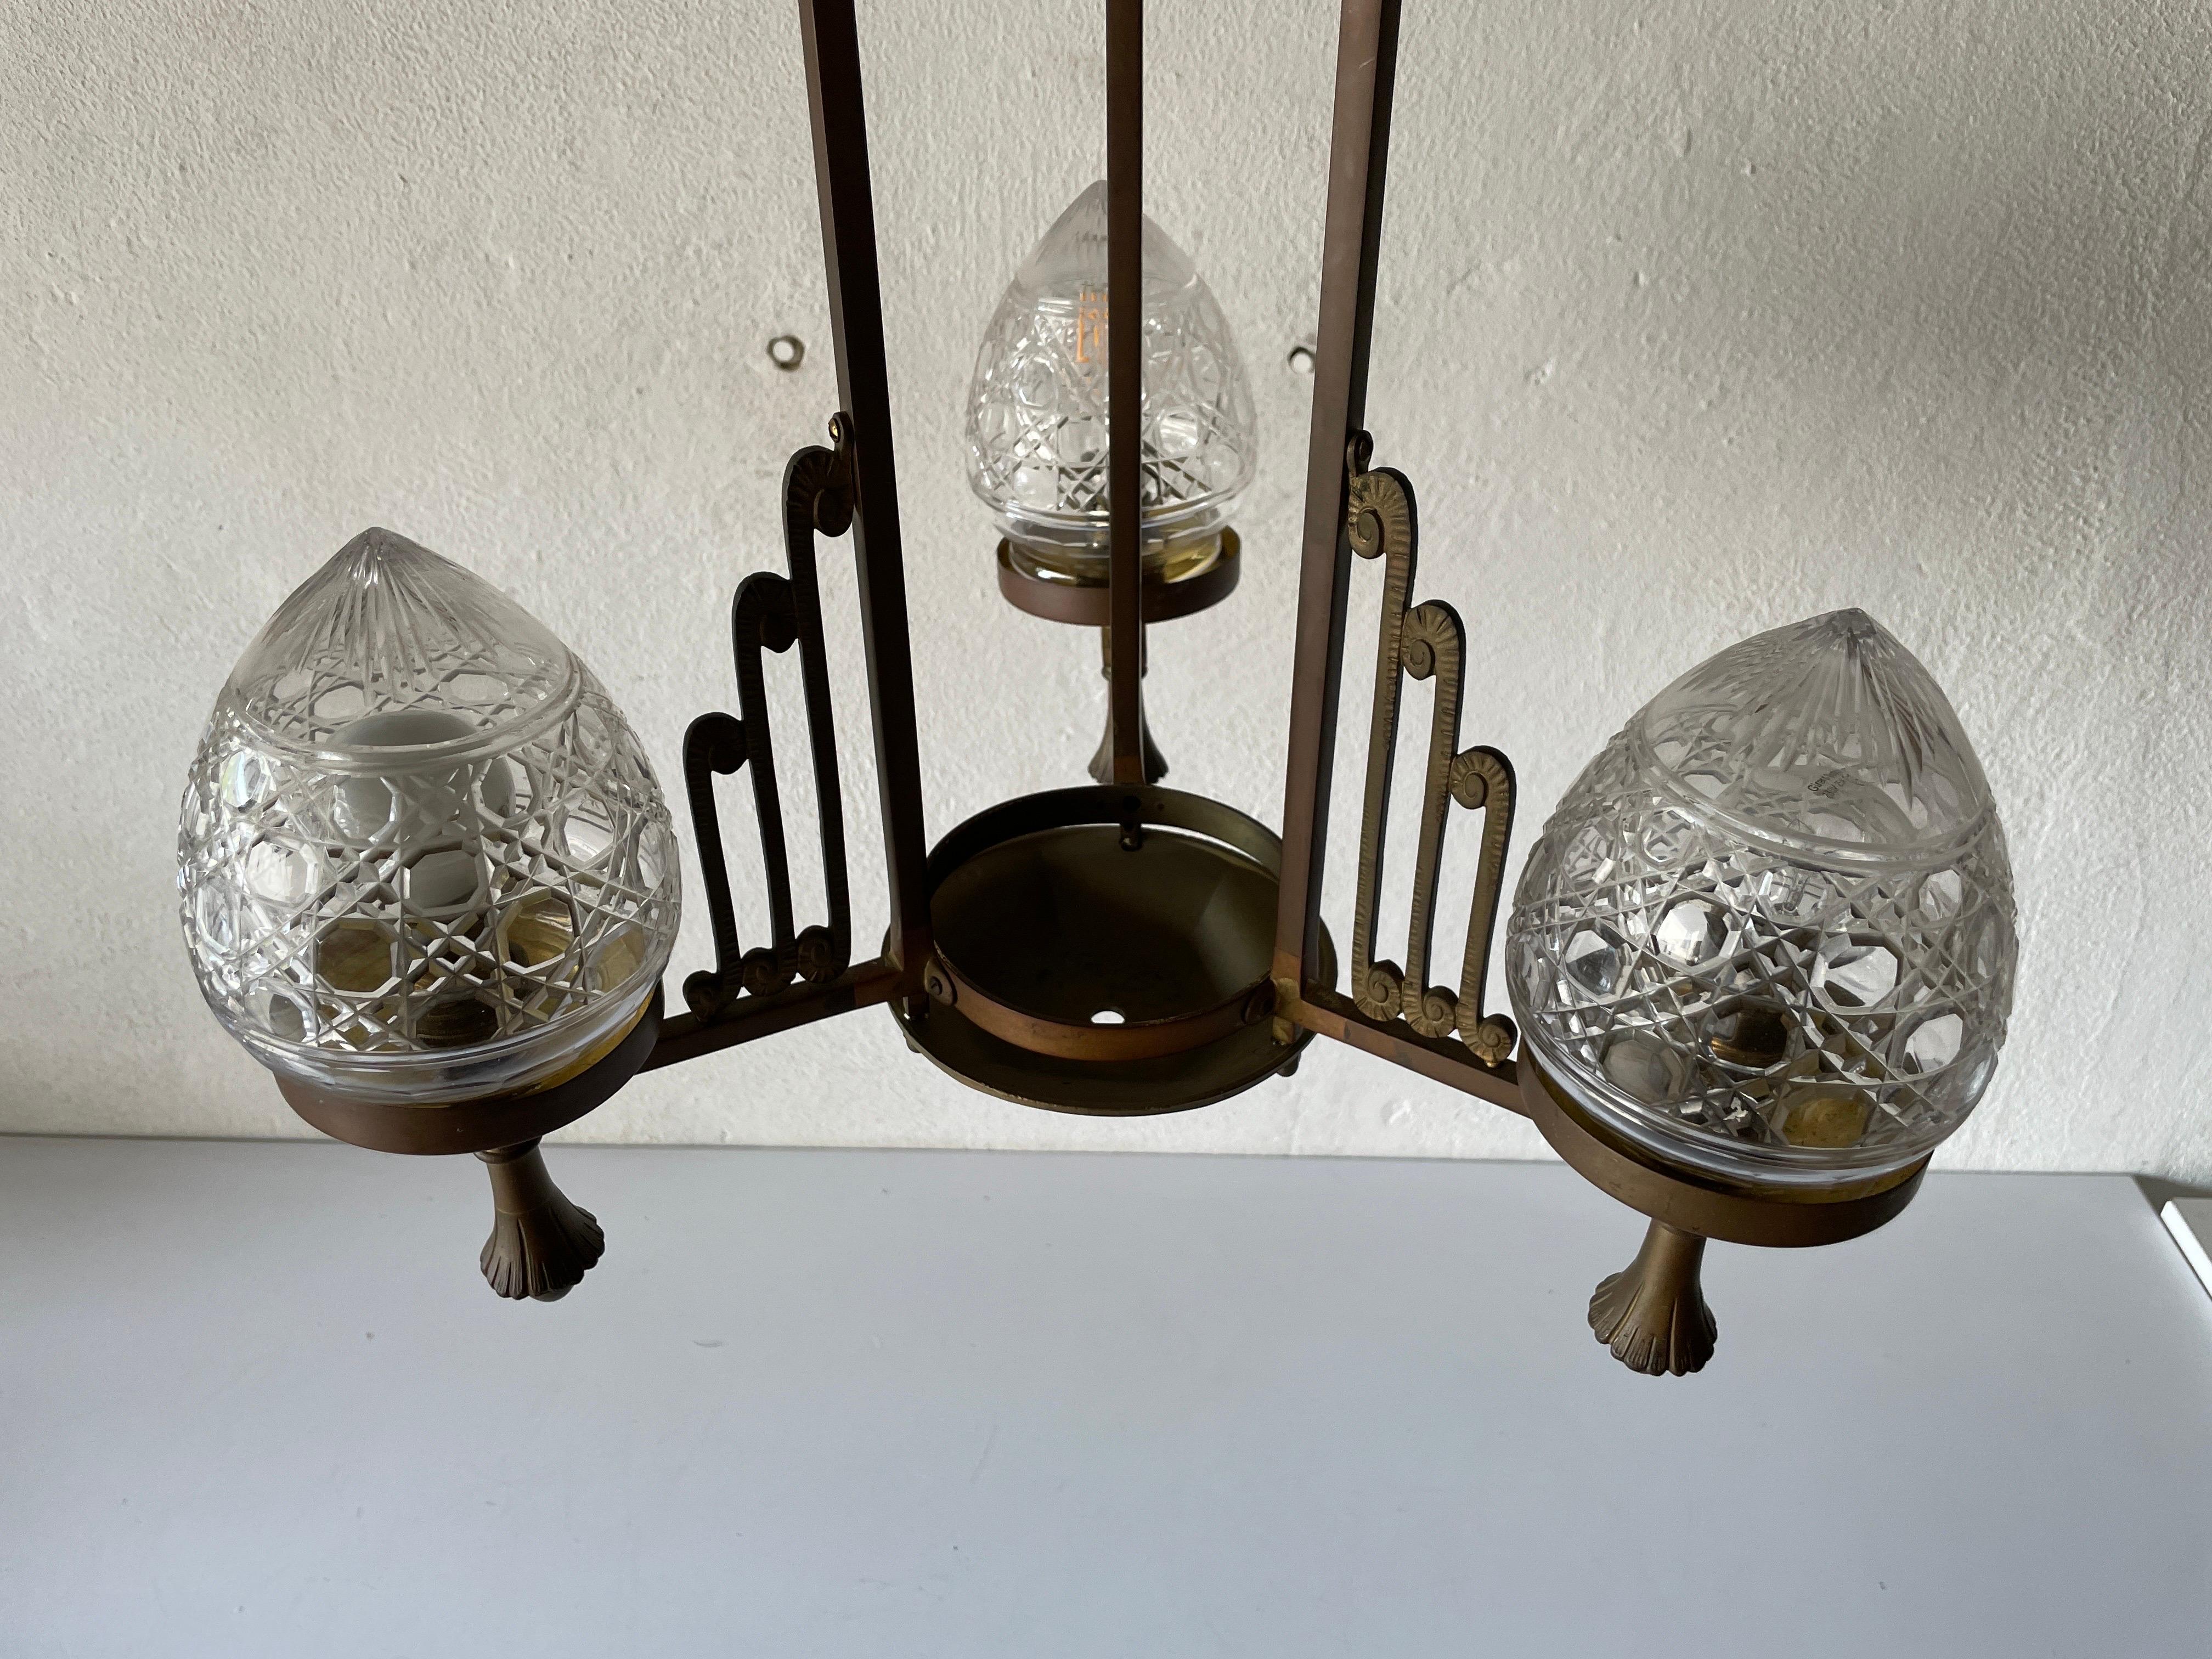 Unique French copper Architectural body chandelier, 1940s, France

Elegant design hanging lamp

Lampshade is in good condition and very clean. 
This lamp works with 3x B22 French light bulb. Max 100W
Wired and suitable to use with 220V and